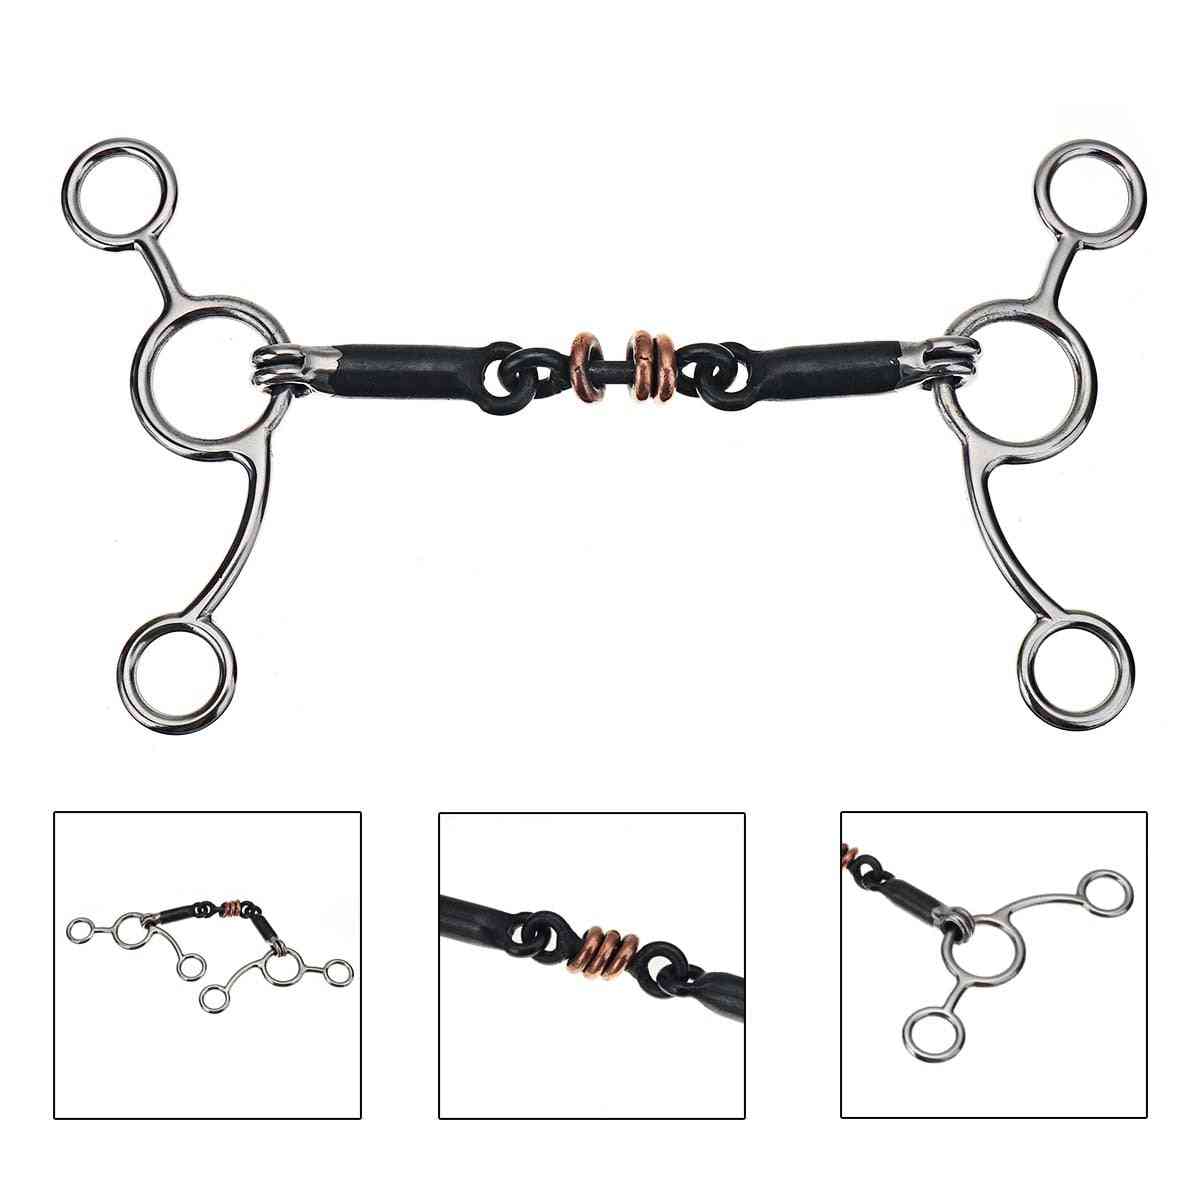 Stainless Steel Horse Bit Horse Mouth Riding Racing Equipment Double Jointed Mouth Snaffle Bit Equestrian Decoration Accessory